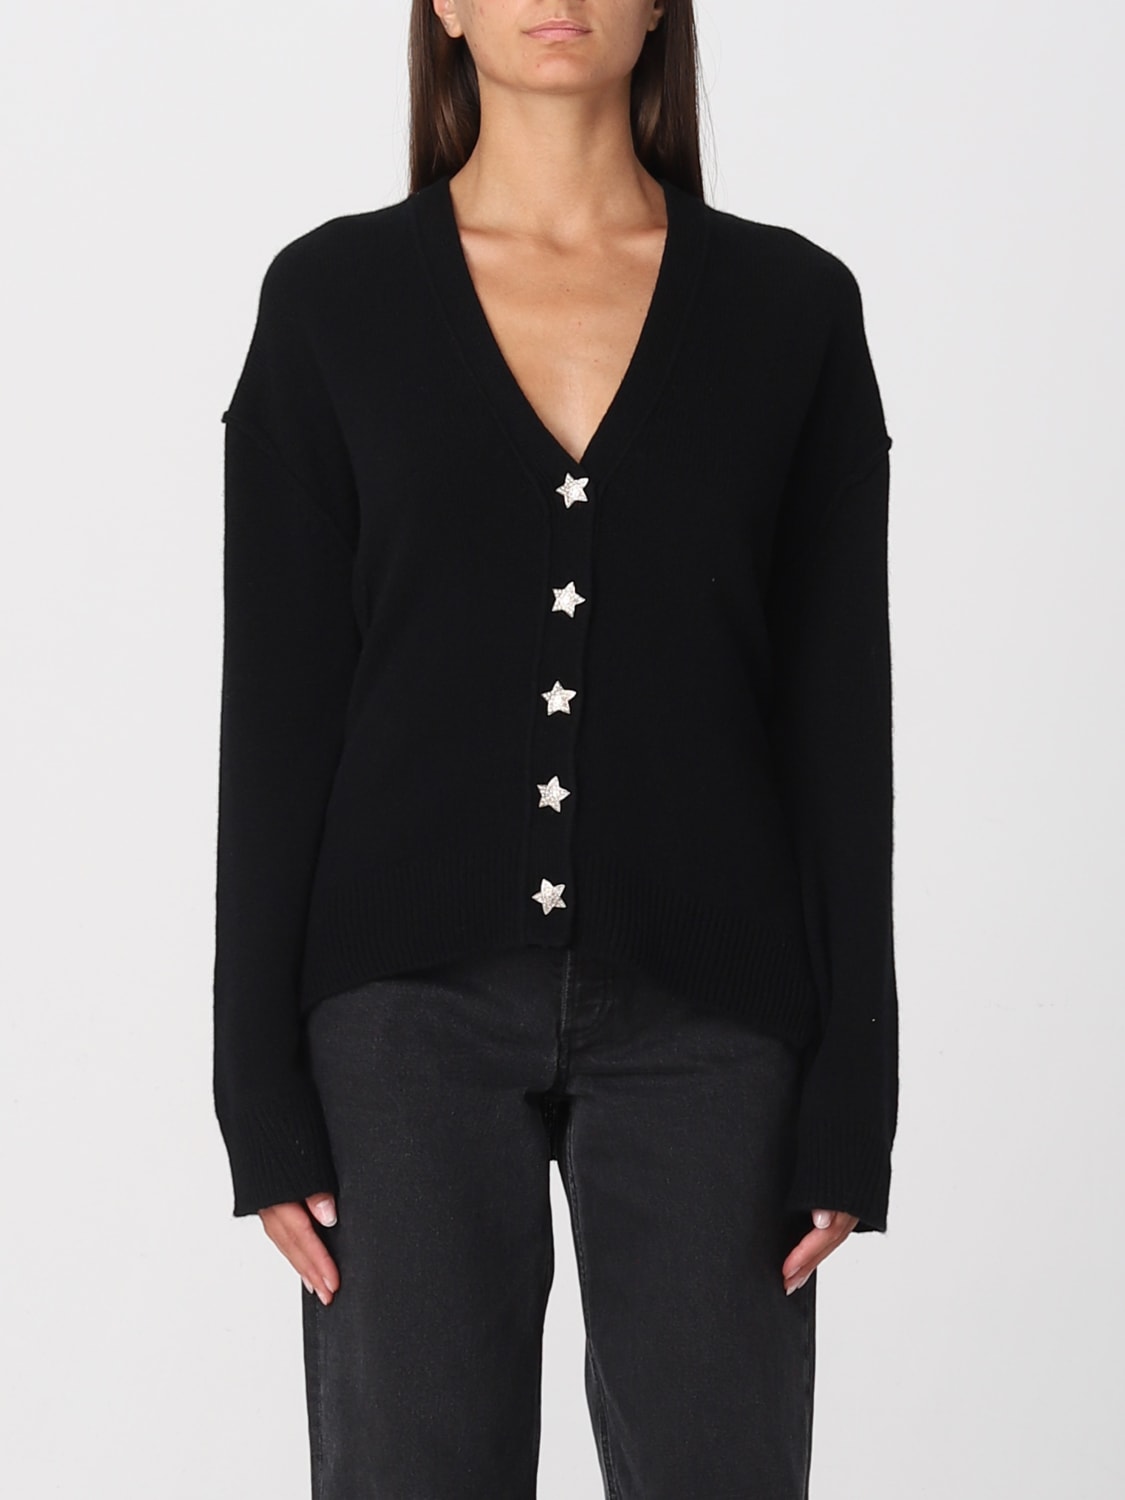 ZADIG & VOLTAIRE: sweater for woman - Black | Zadig & Voltaire sweater ...